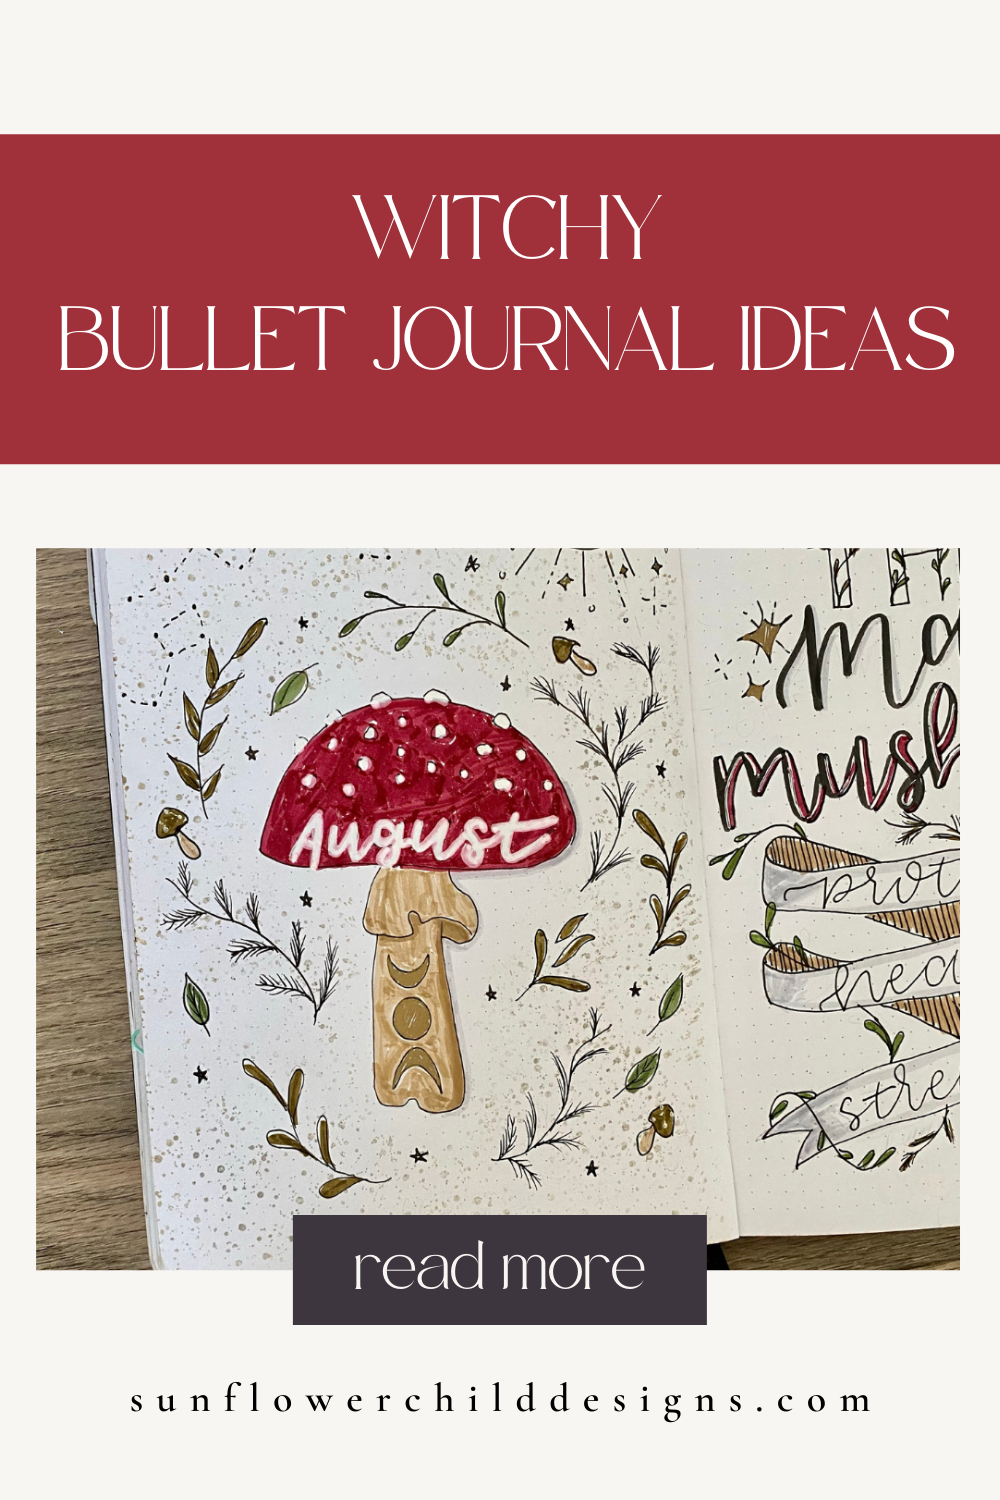 witchy-bullet-journal-ideas-august-bullet-journal-ideas 4.png